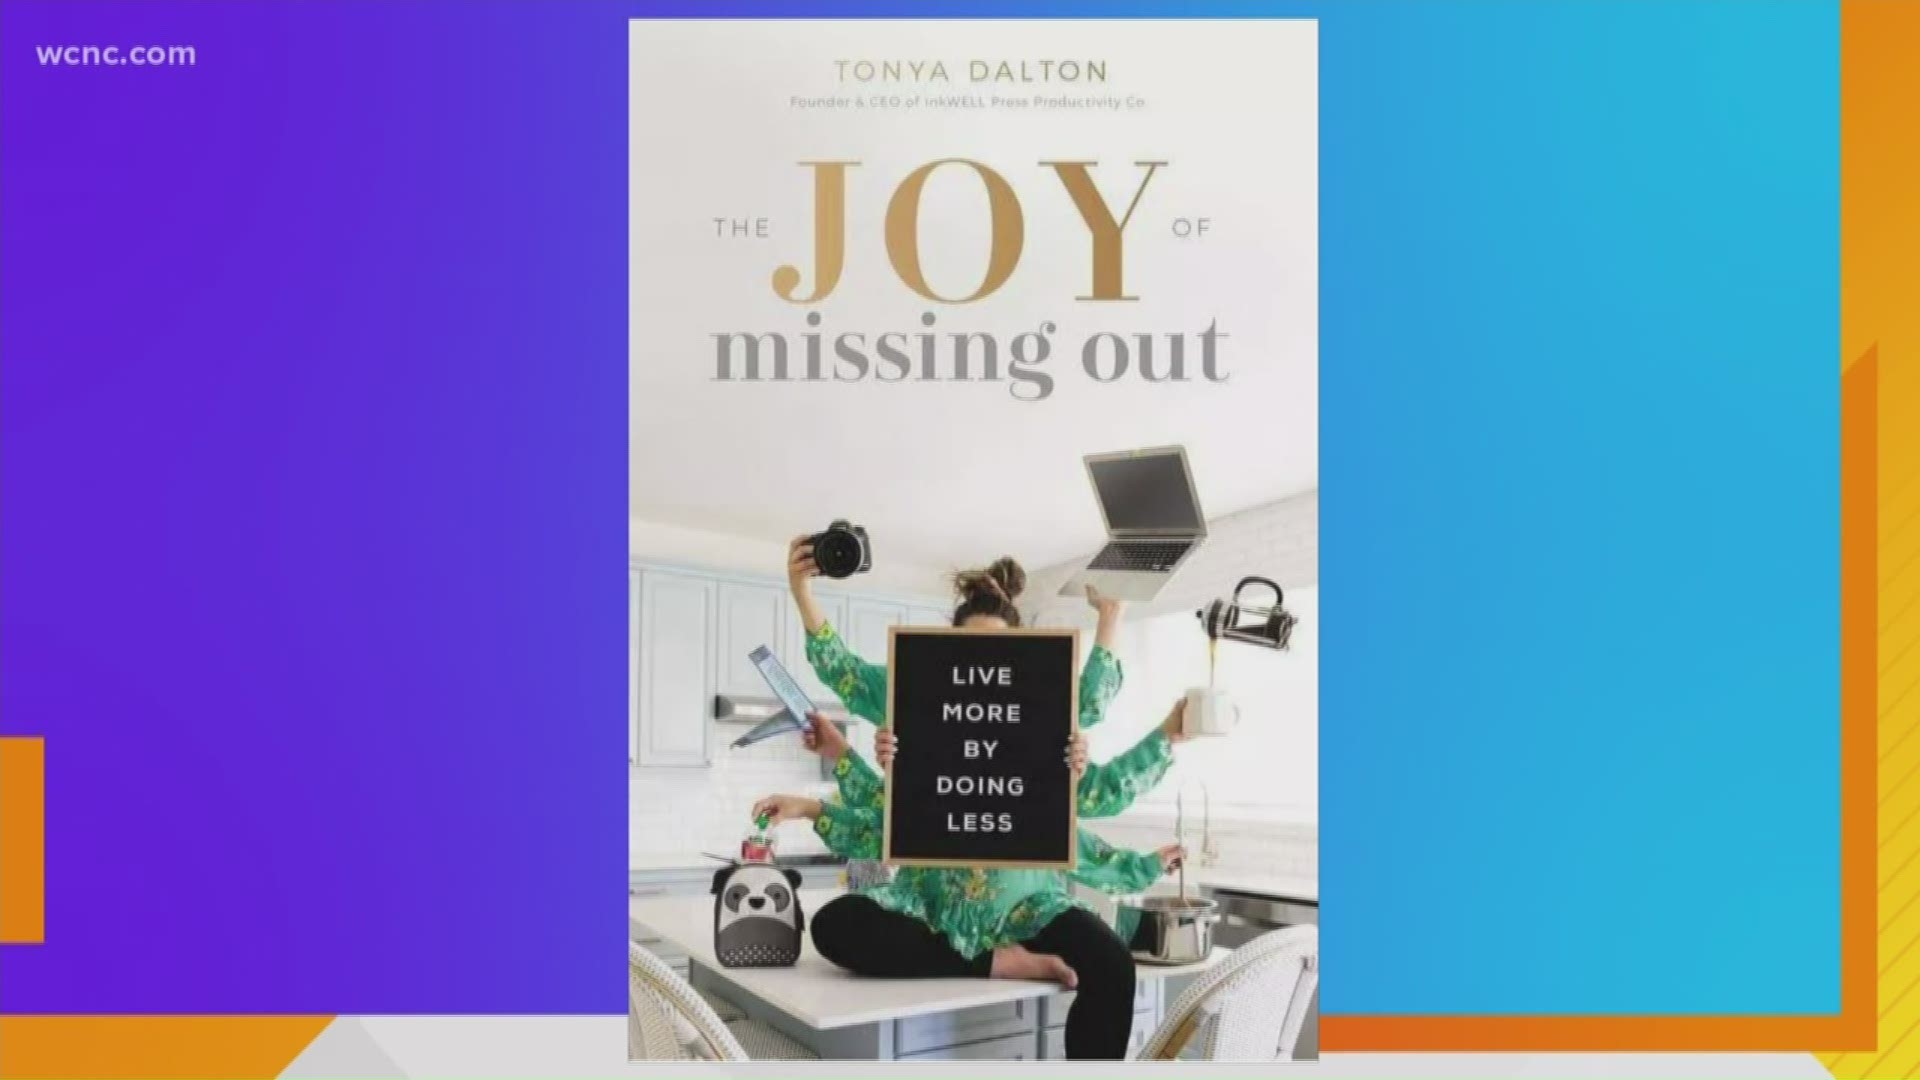 Author Tonya Dalton discusses the importance of knowing when to say "no".